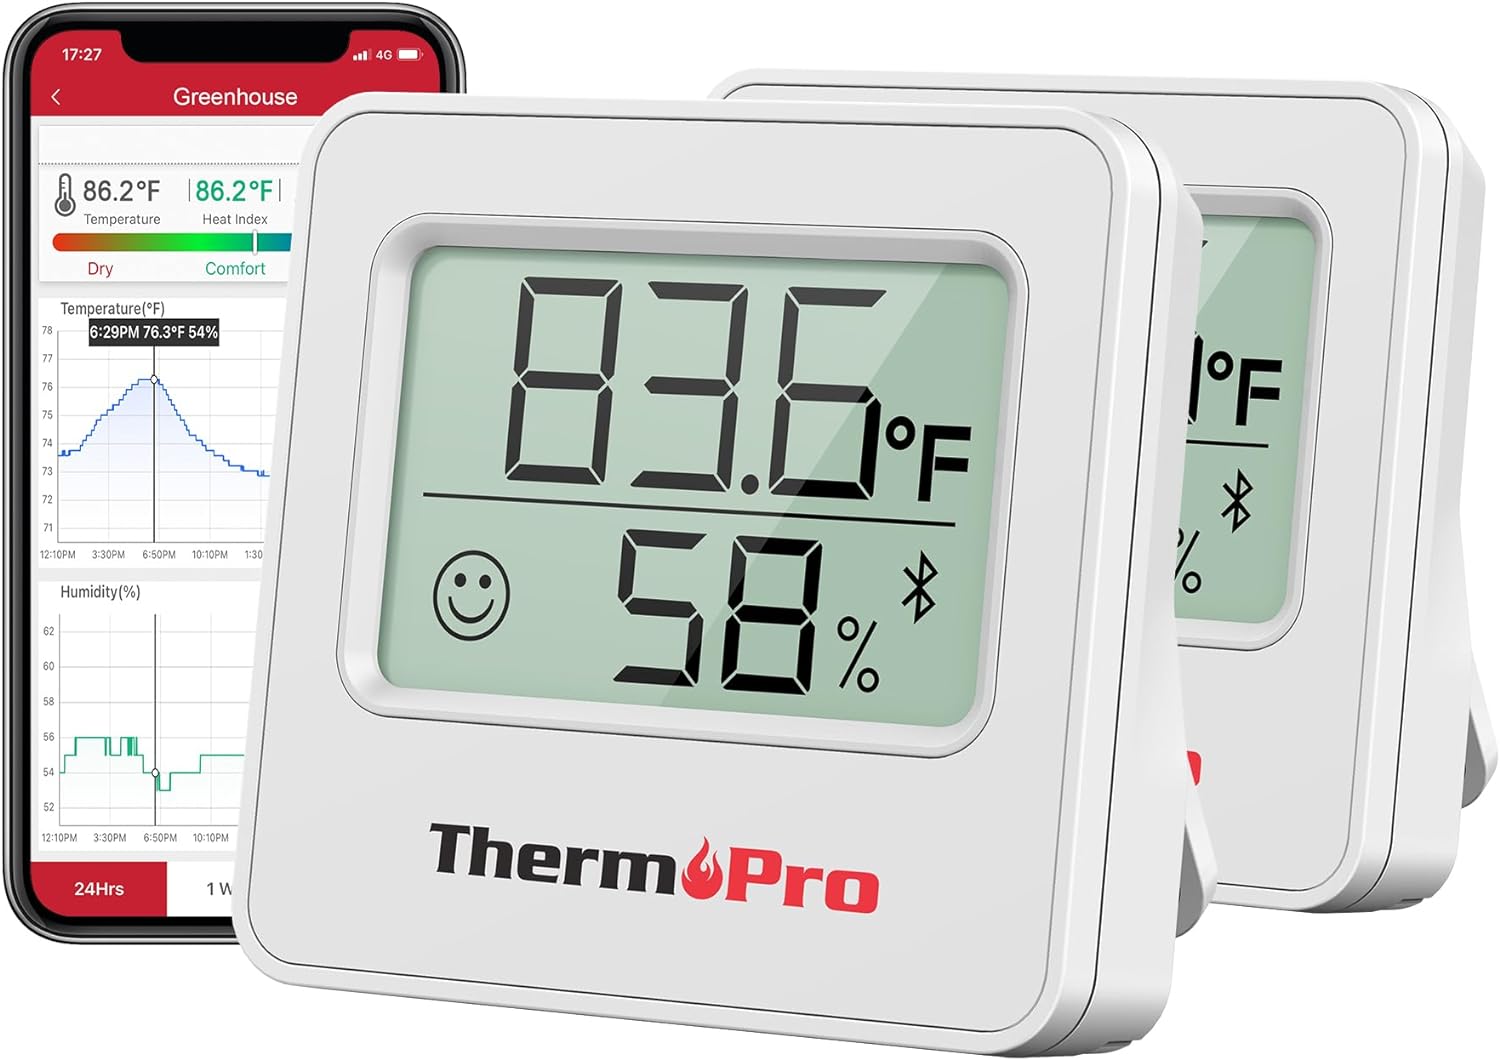 ThermoPro TP357 Digital Hygrometer Indoor Thermometer of 260FT, Bluetooth Humidity Meter with Smart App, Room Humidity Gauge with Humidity Sensor, 2-Year Data Storage and Export